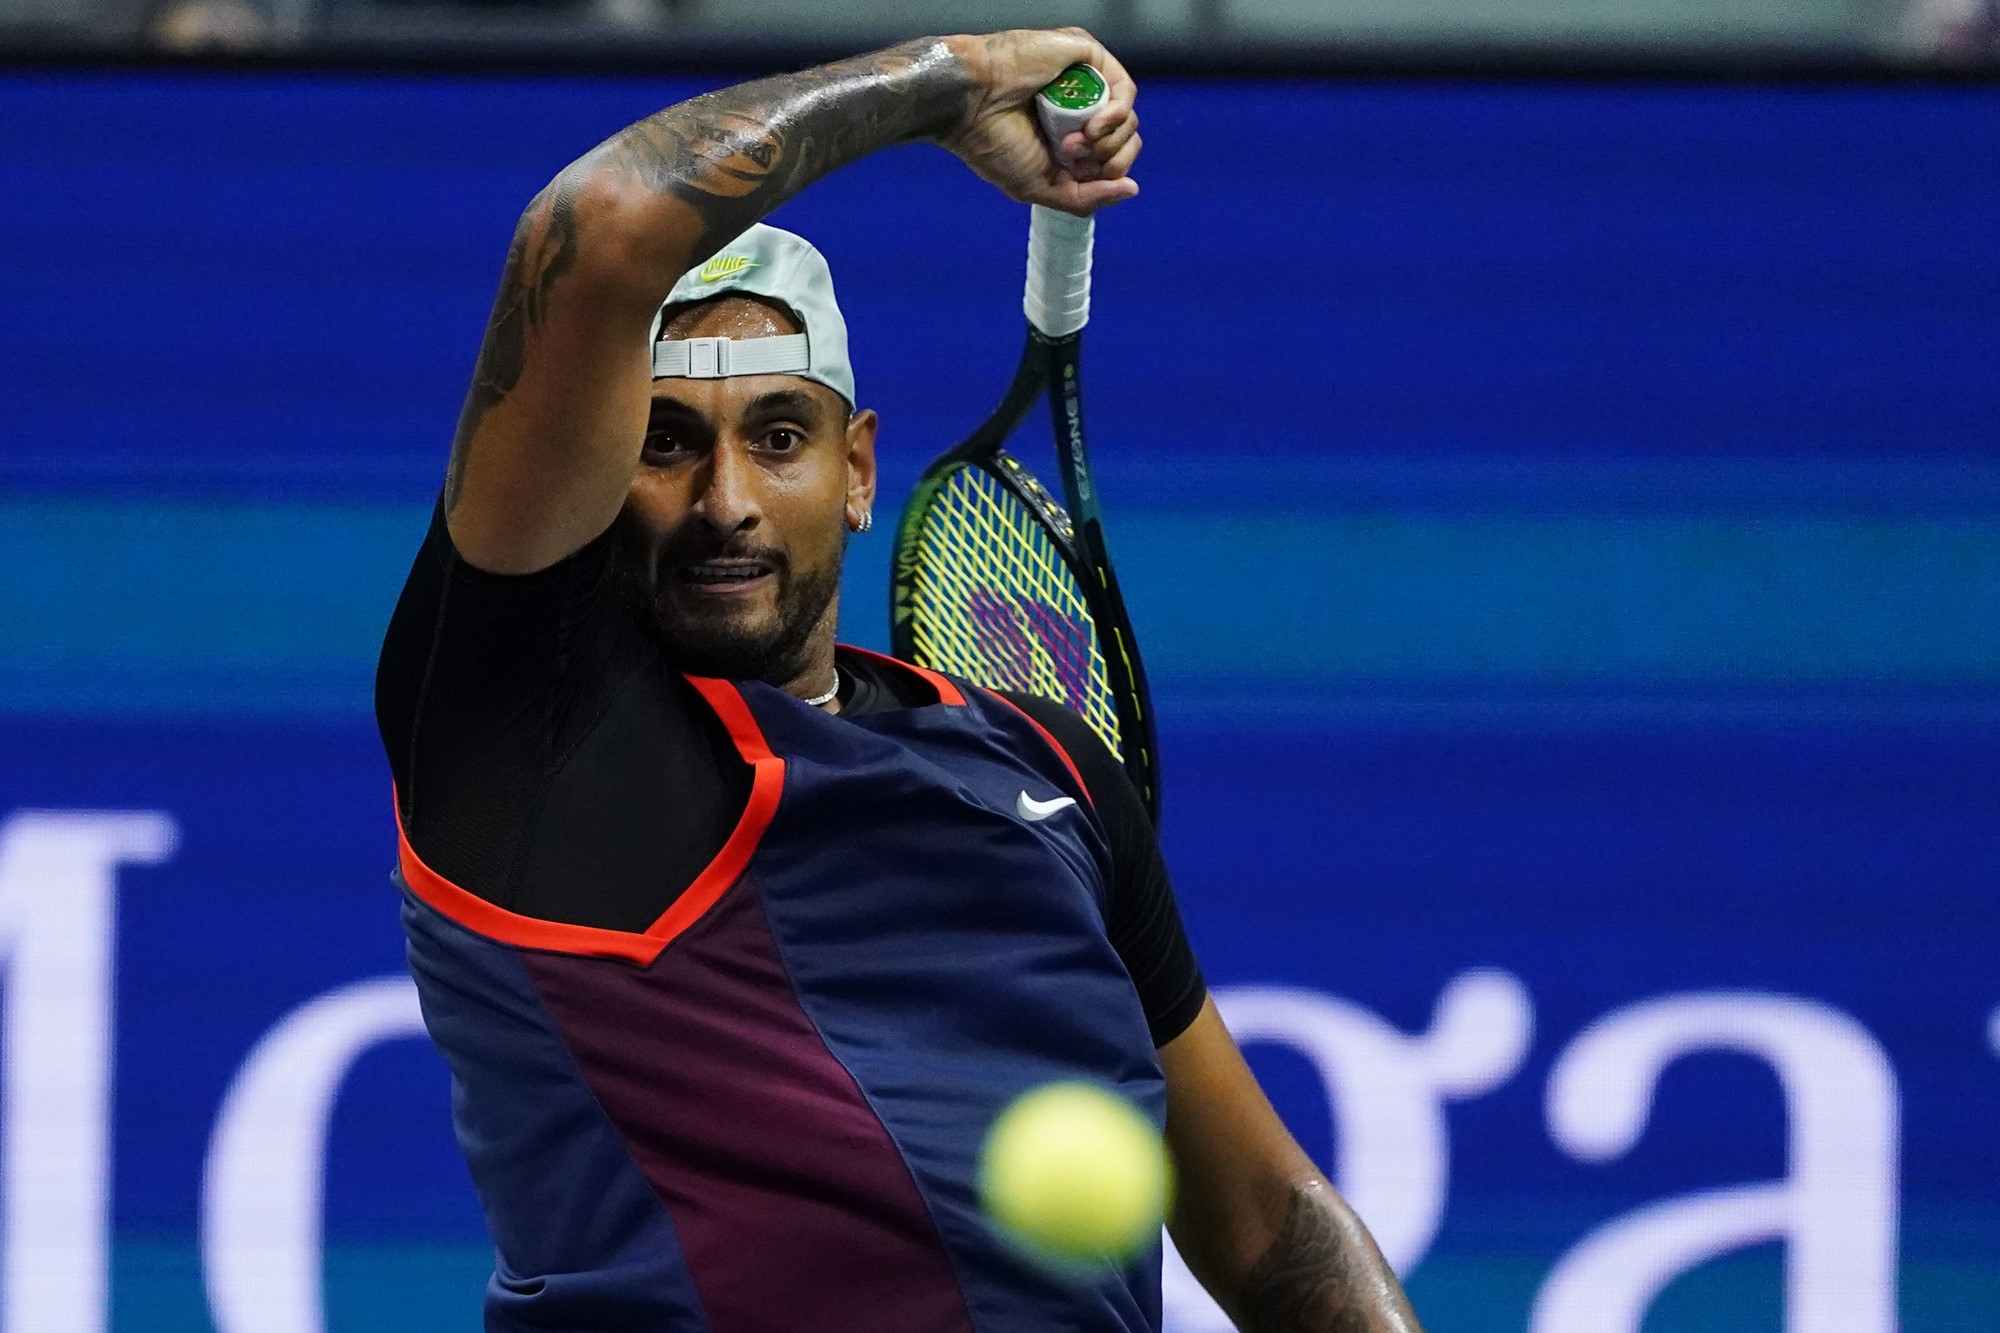 Nick Kyrgios plays a forehand at the US Open.